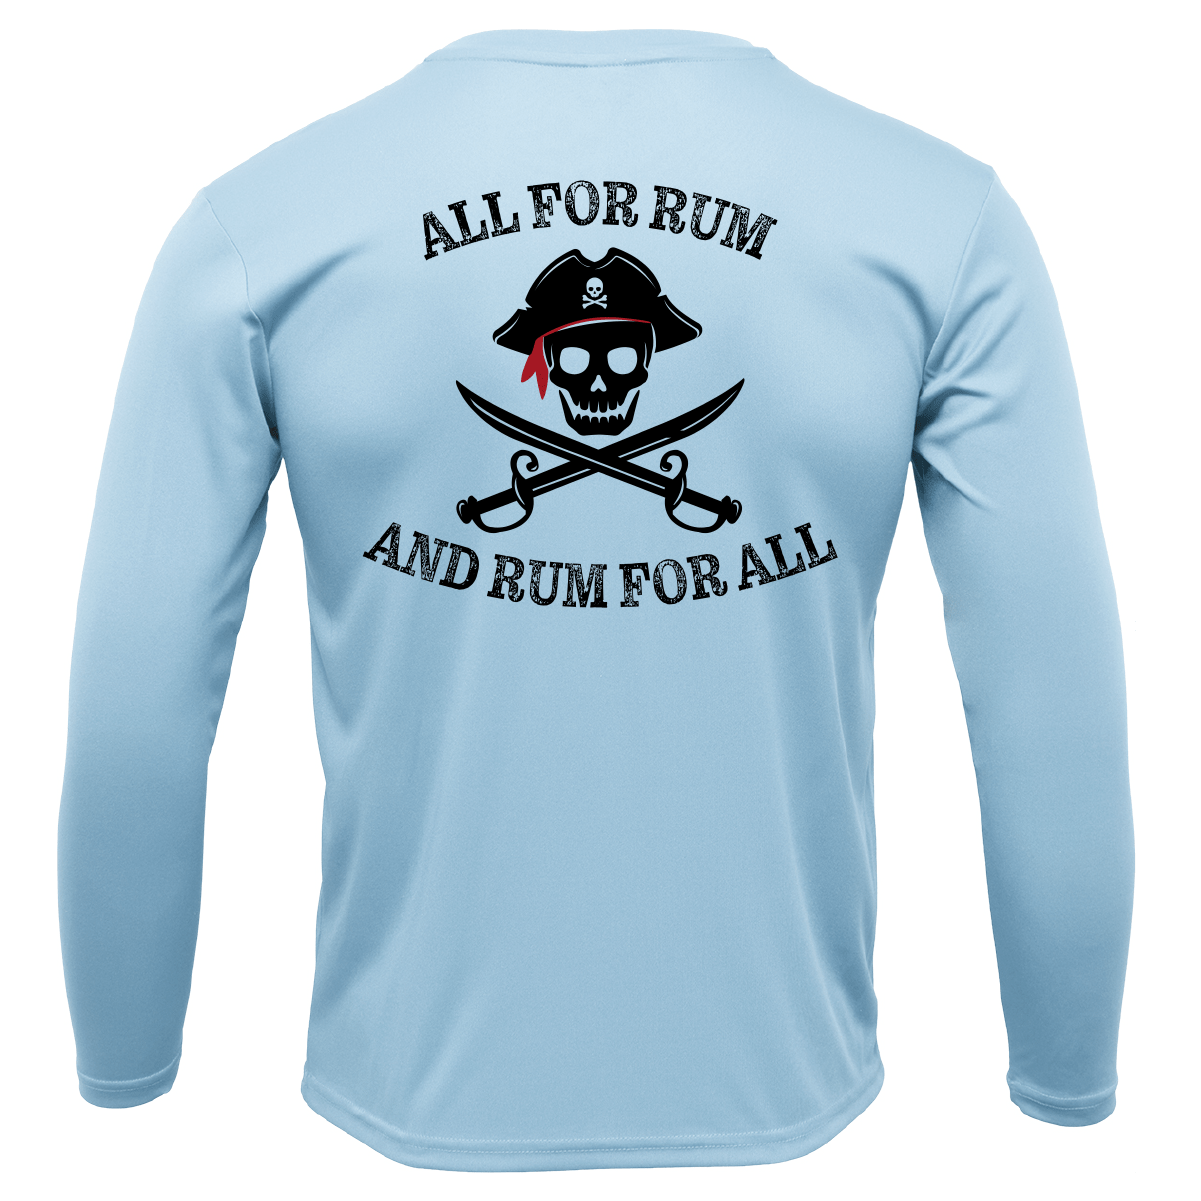 Saltwater Born Shirts Tampa Bay "All For Rum and Rum For All" Long Sleeve UPF 50+ Dry-Fit Shirt